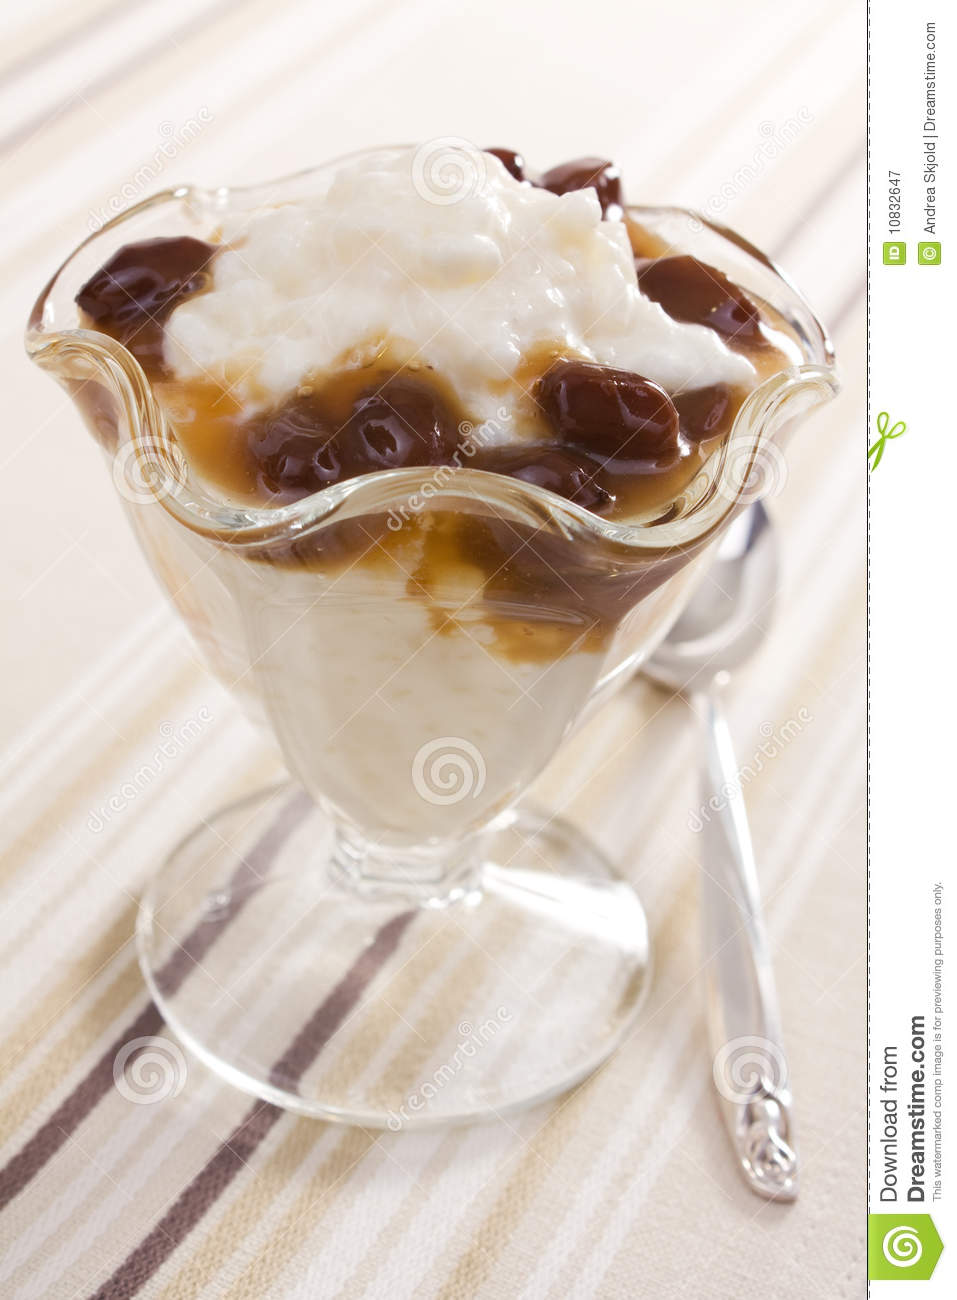 Rice Pudding With A Sweet Rum Raisin Sauce 